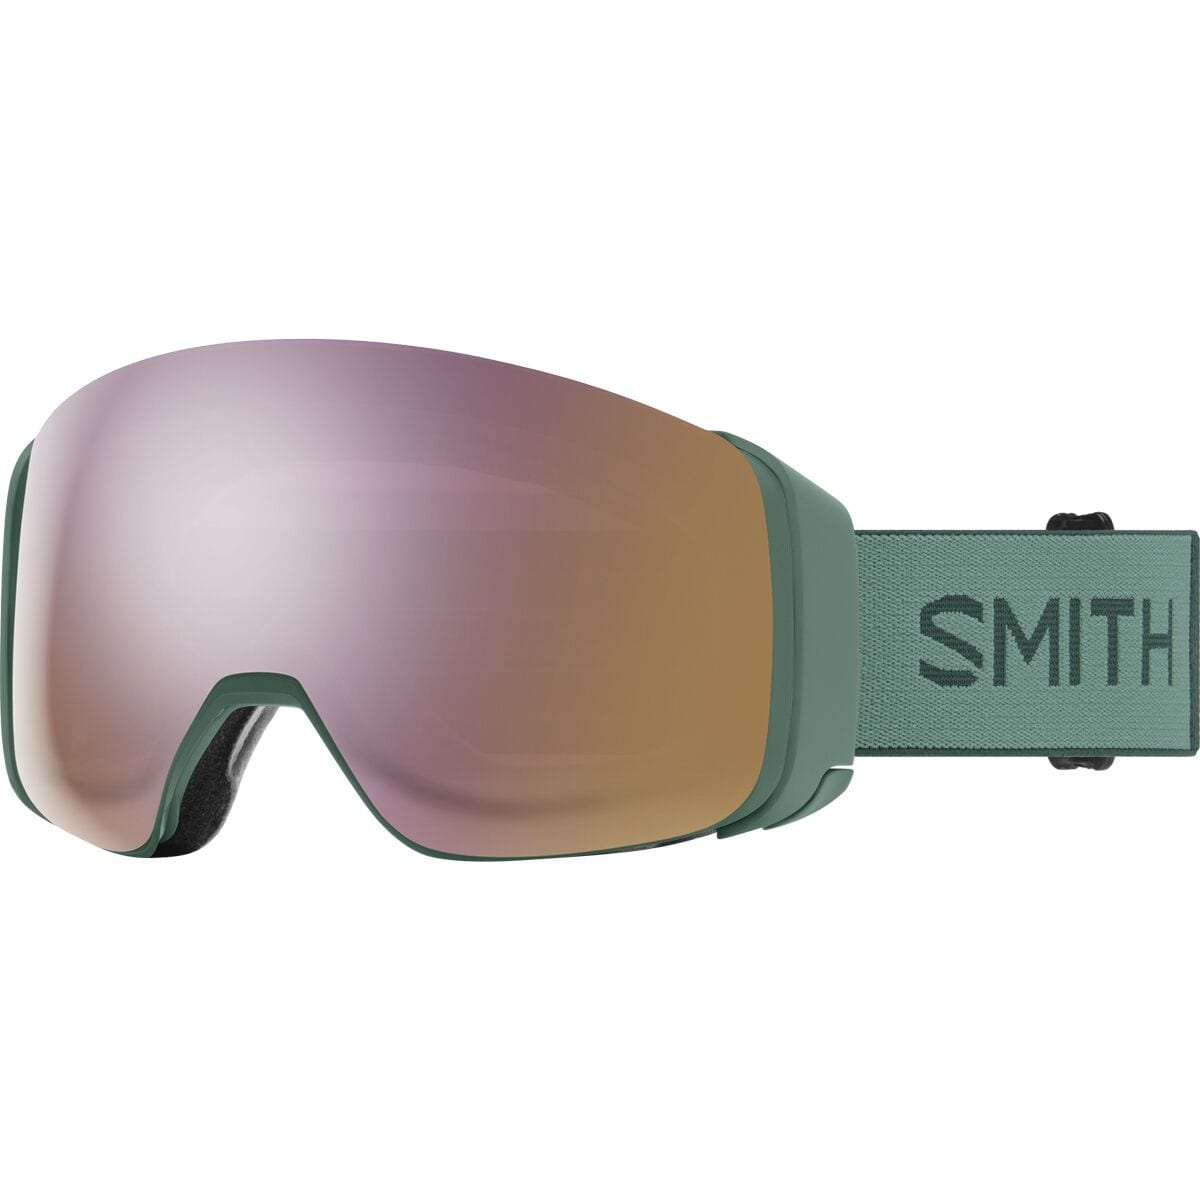 Smith 4D Mag Asian Fit Goggles